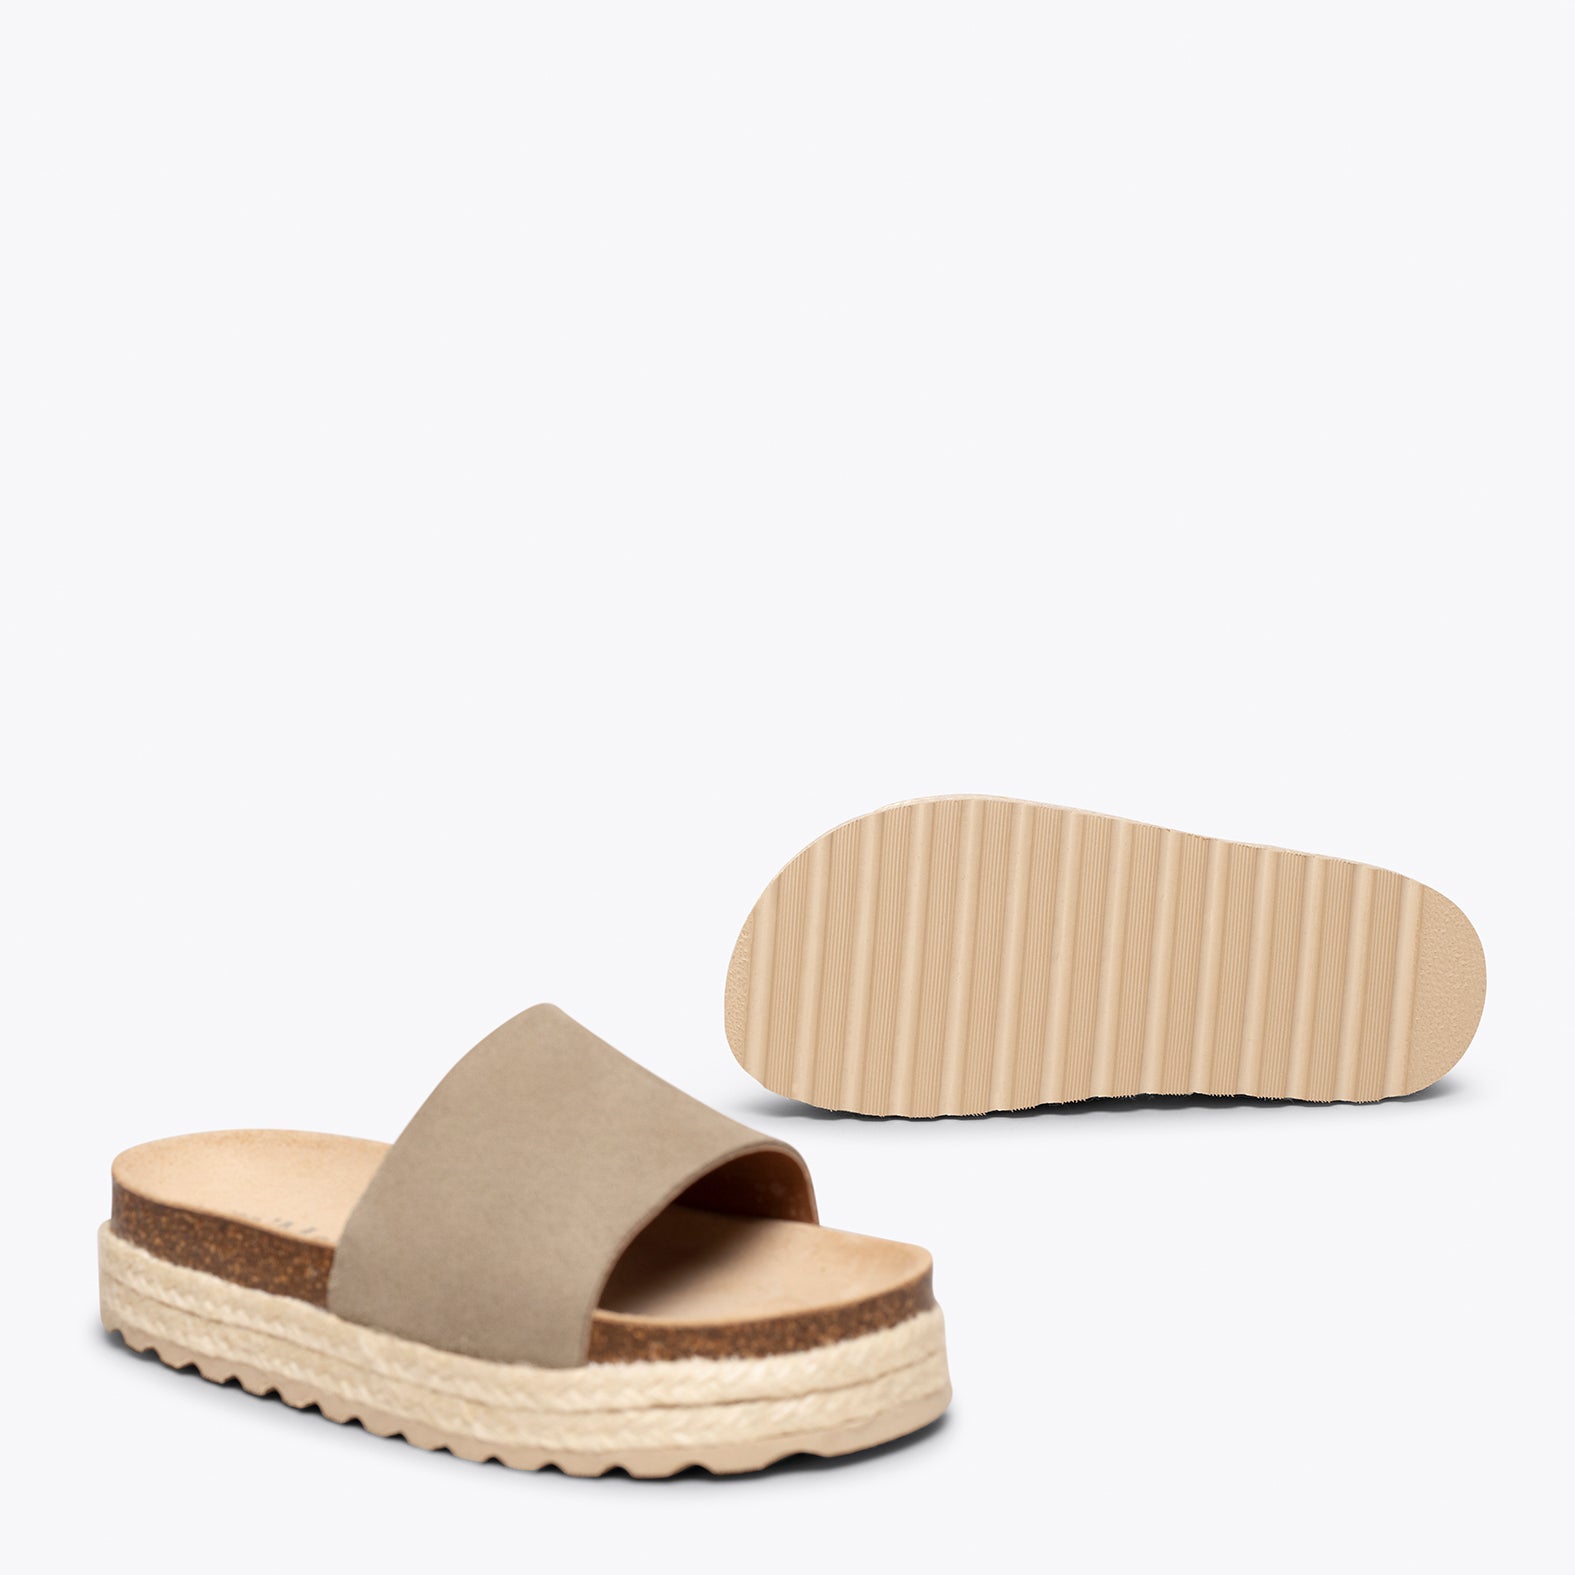 STRAWBERRY – TAUPE flat sandals for girls